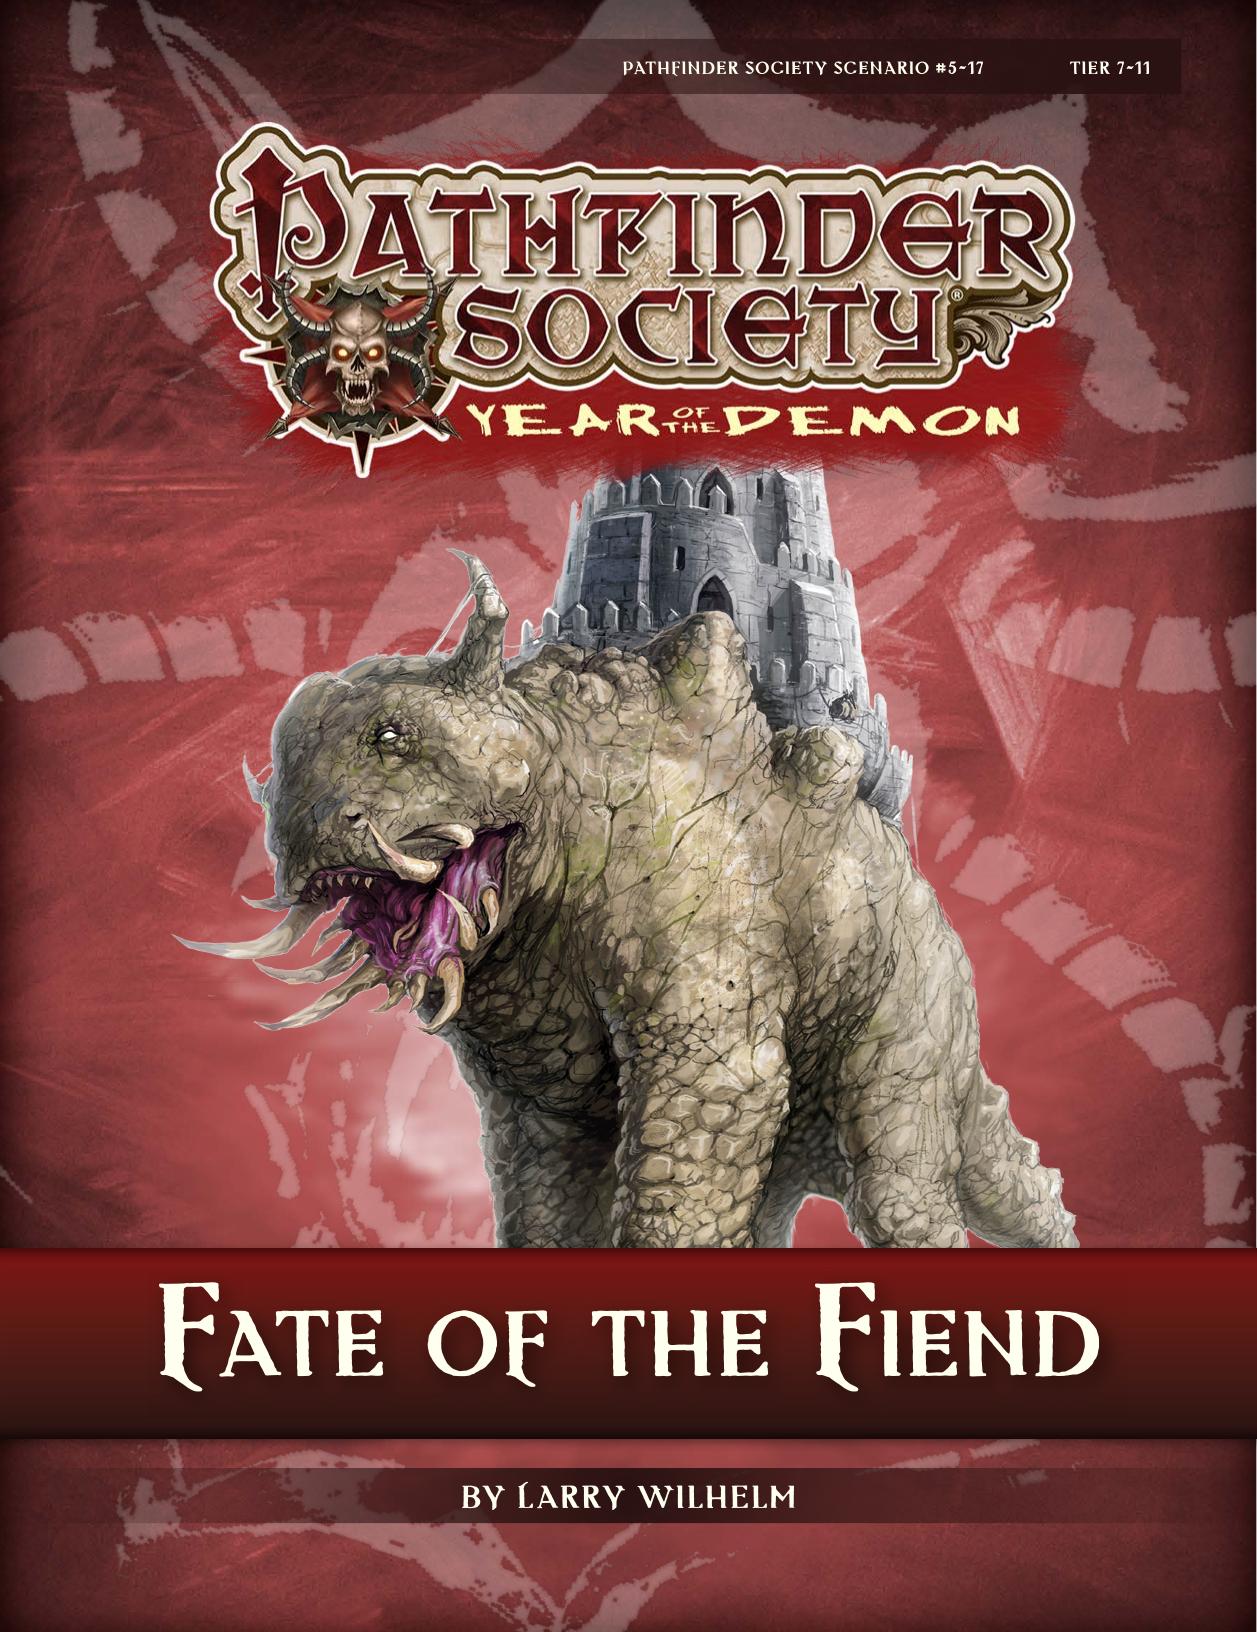 Pathfinder Society: Fate of the Fiend